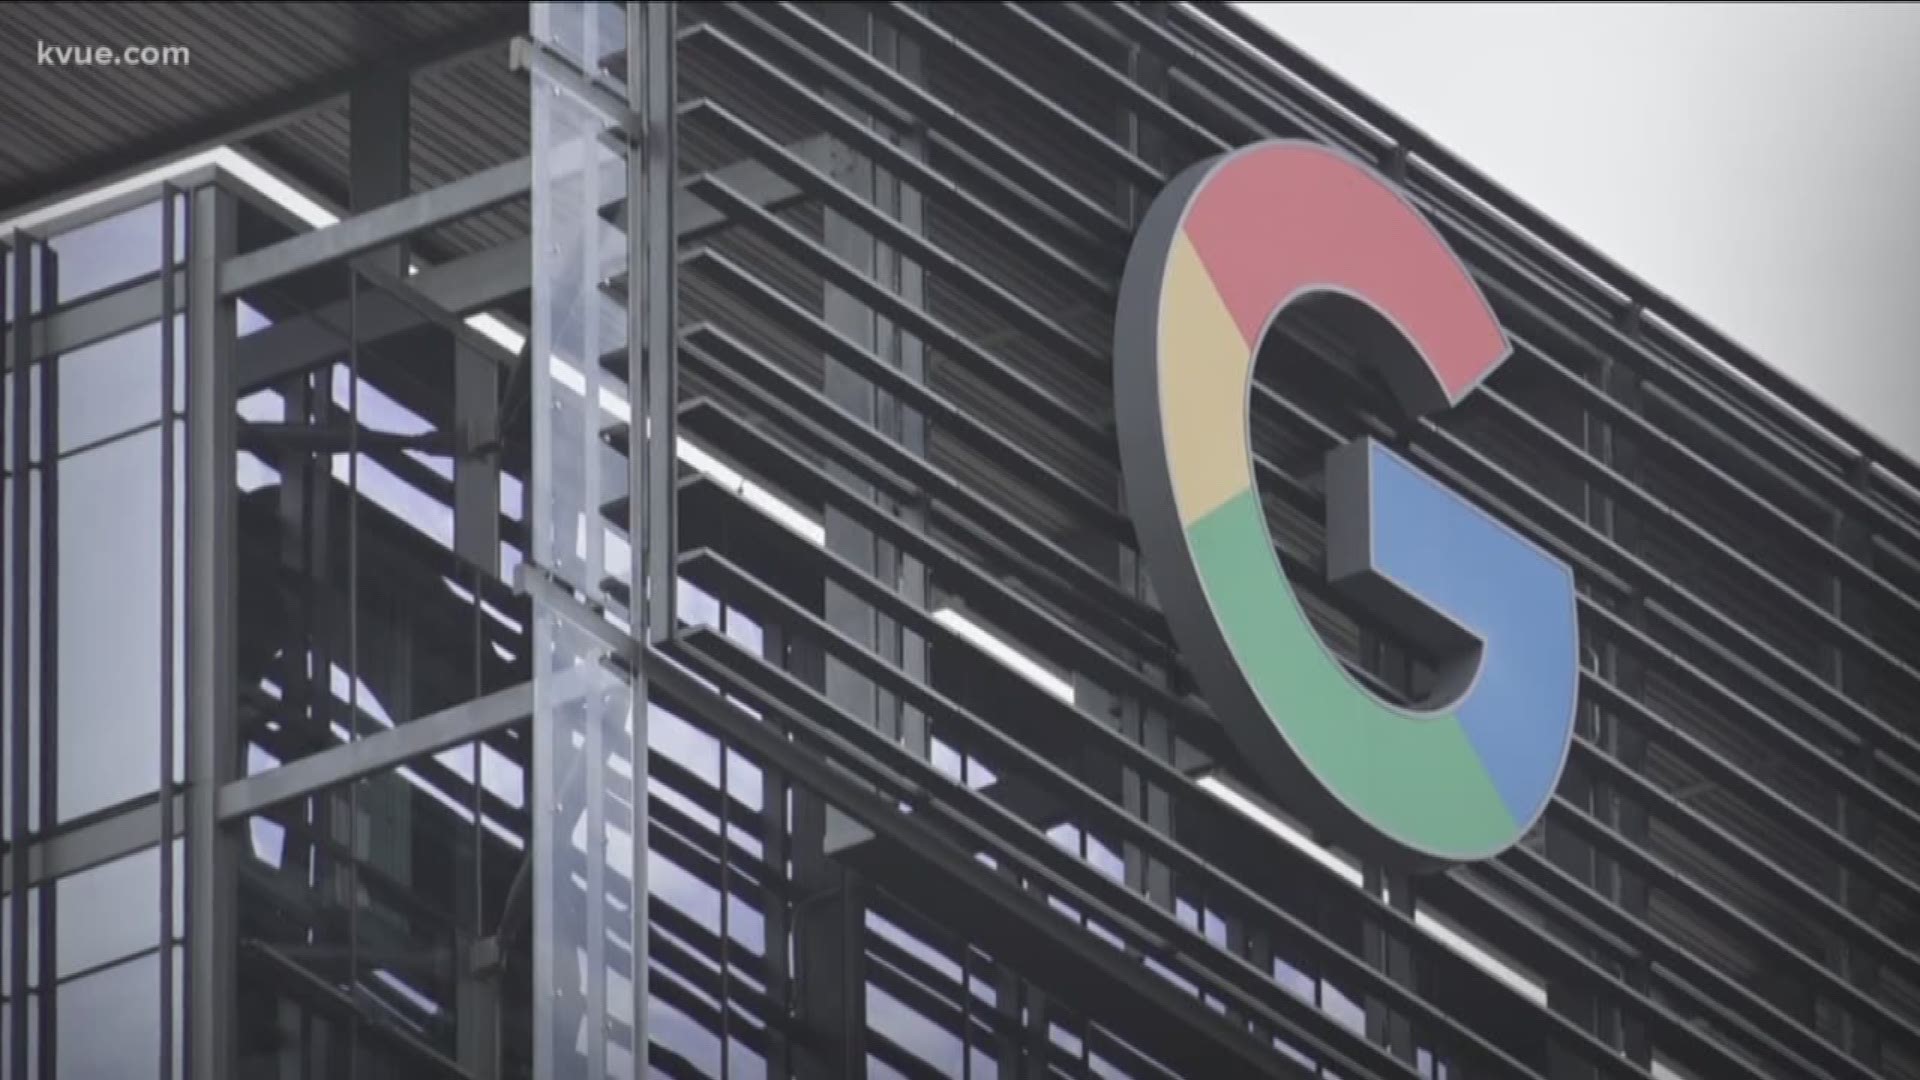 Google is expanding in Downtown Austin. The tech giant is leasing office space in two new buildings that are currently under construction.